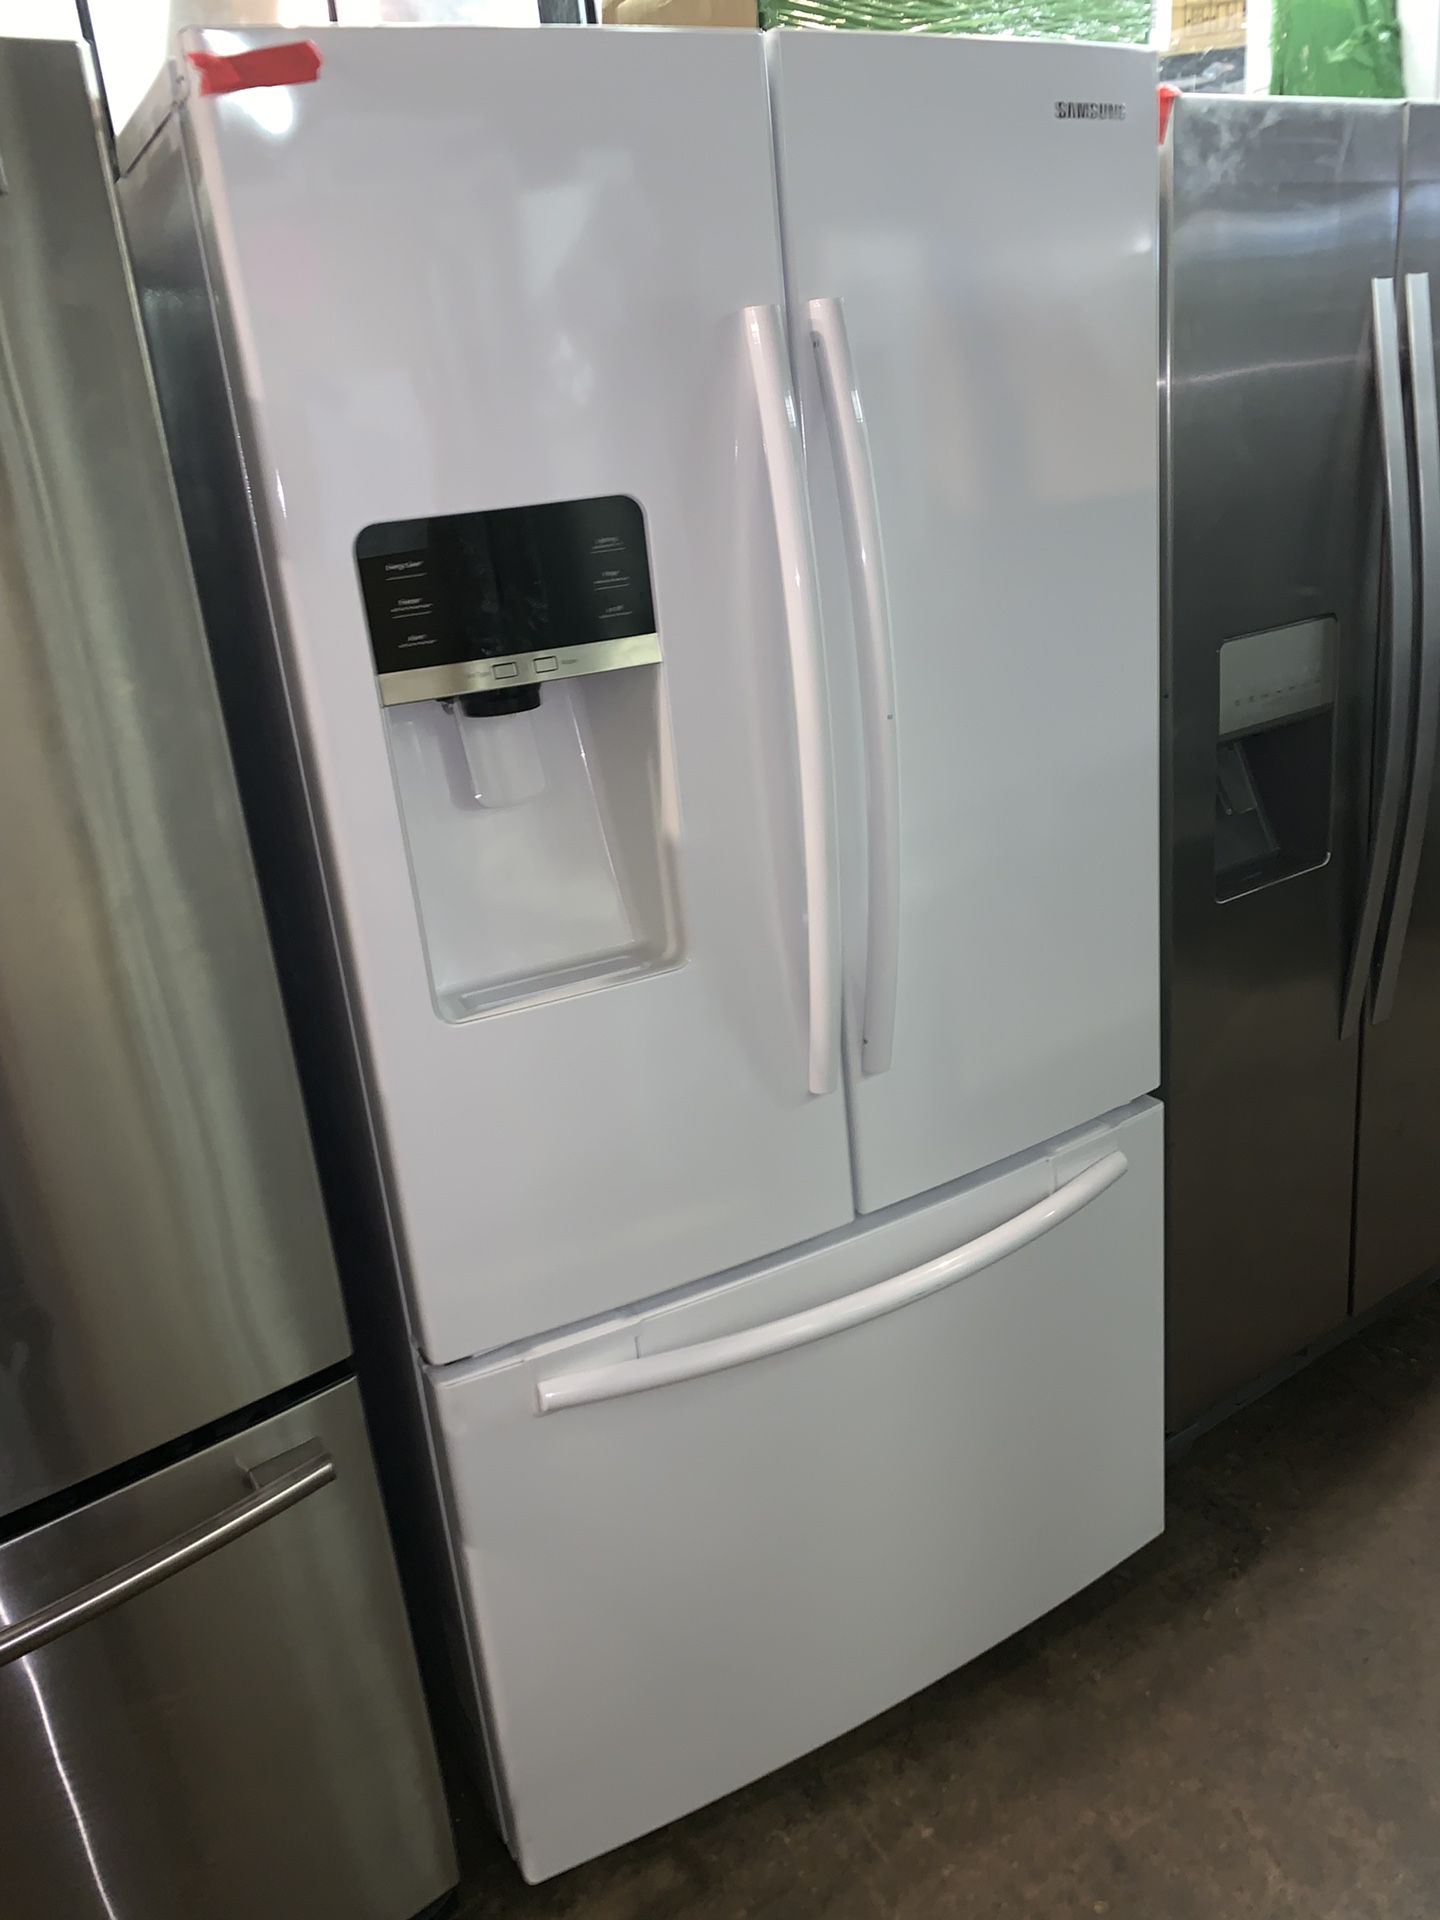 SAMSUNG 36in. French doors refrigerator in excellent conditions with 4 months warranty